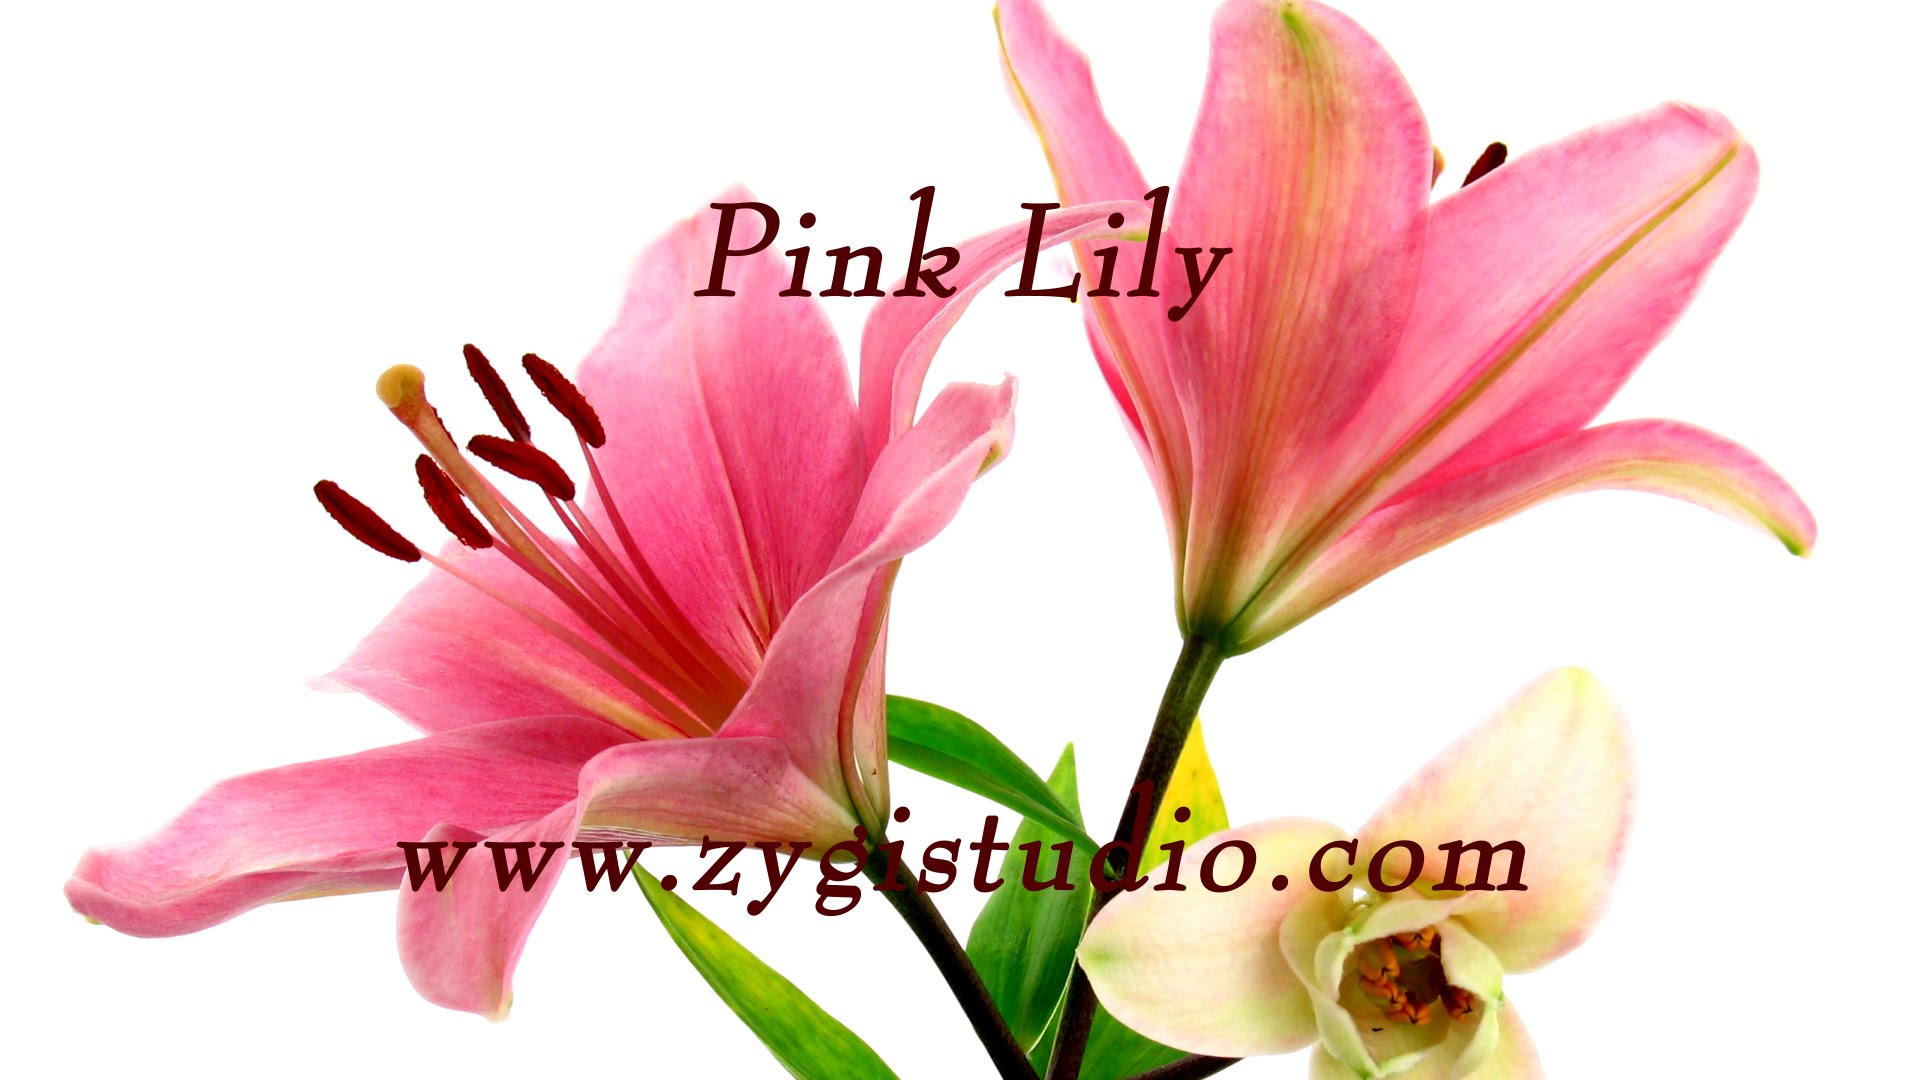 Time-lapse of Opening Pink Lily Flower. - YouTube